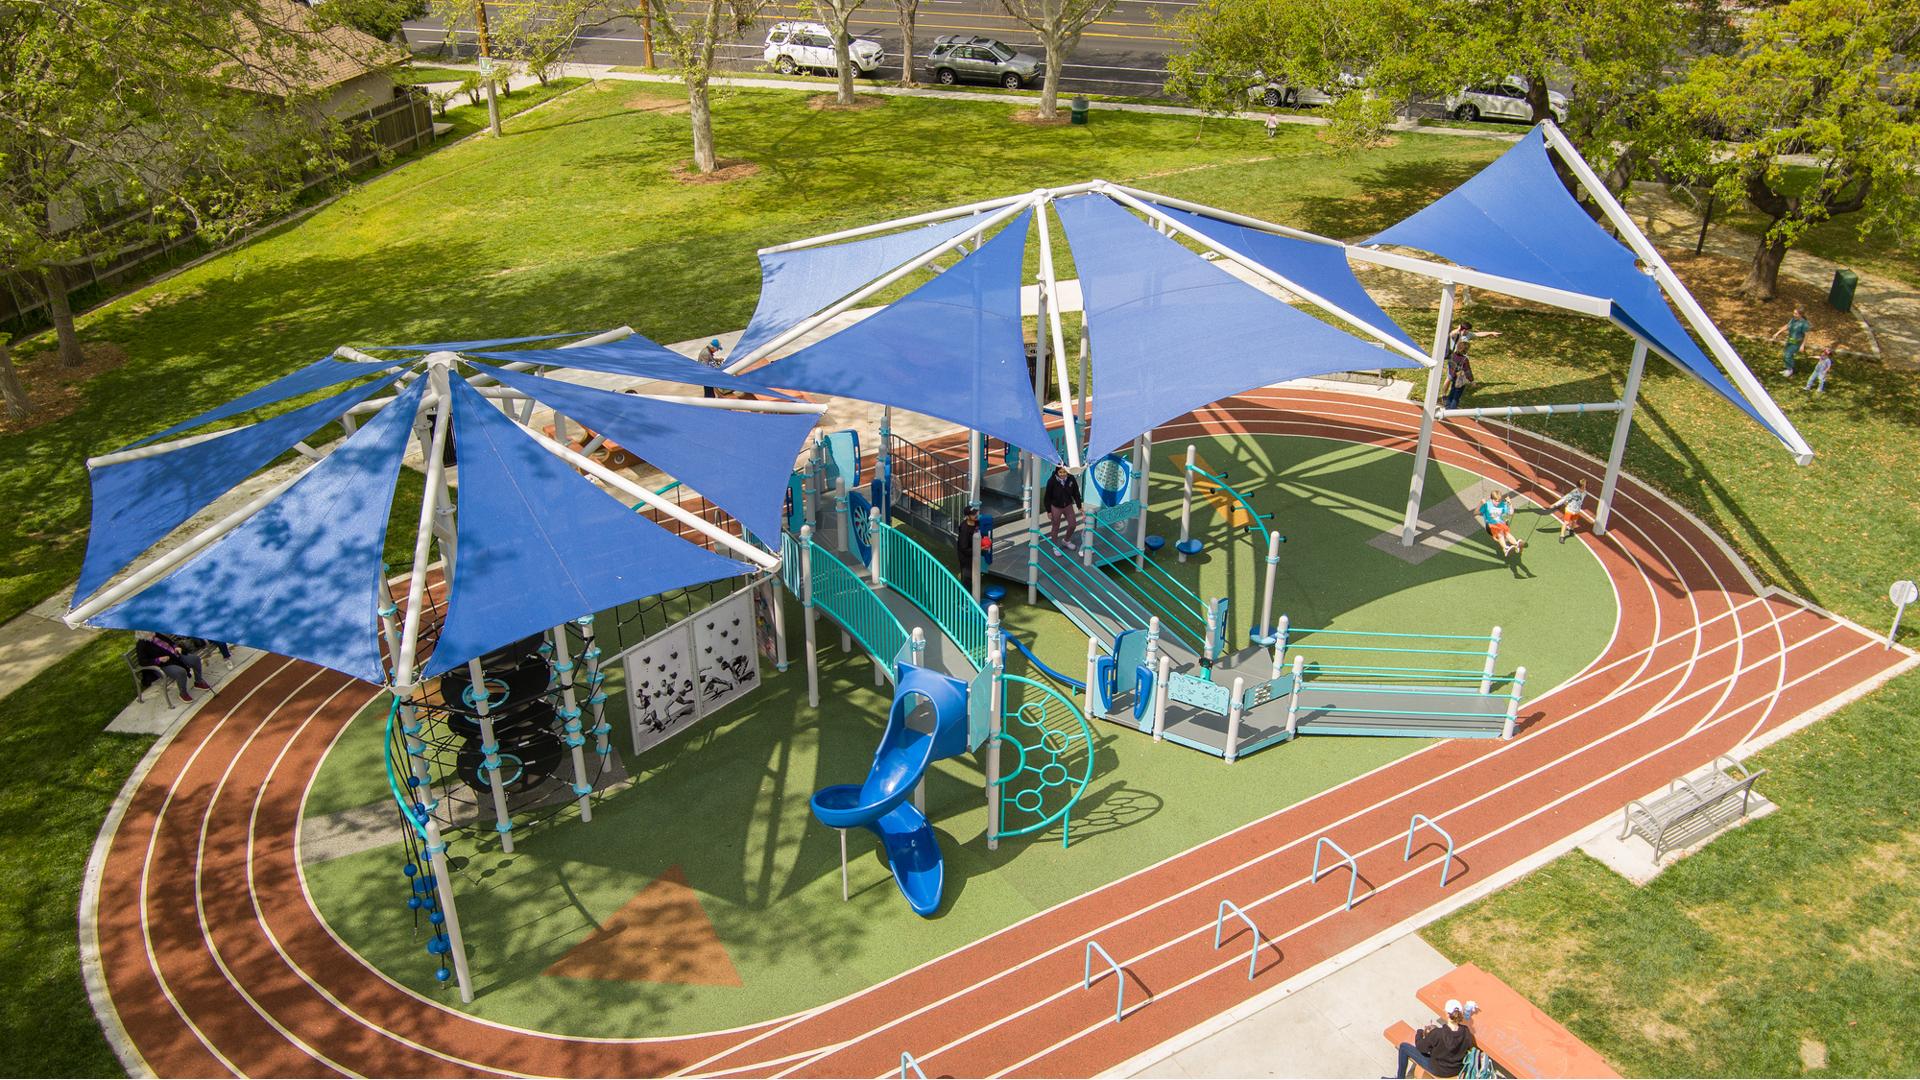 A running track surrounds a large inclusive playground with three large shade systems overhead.